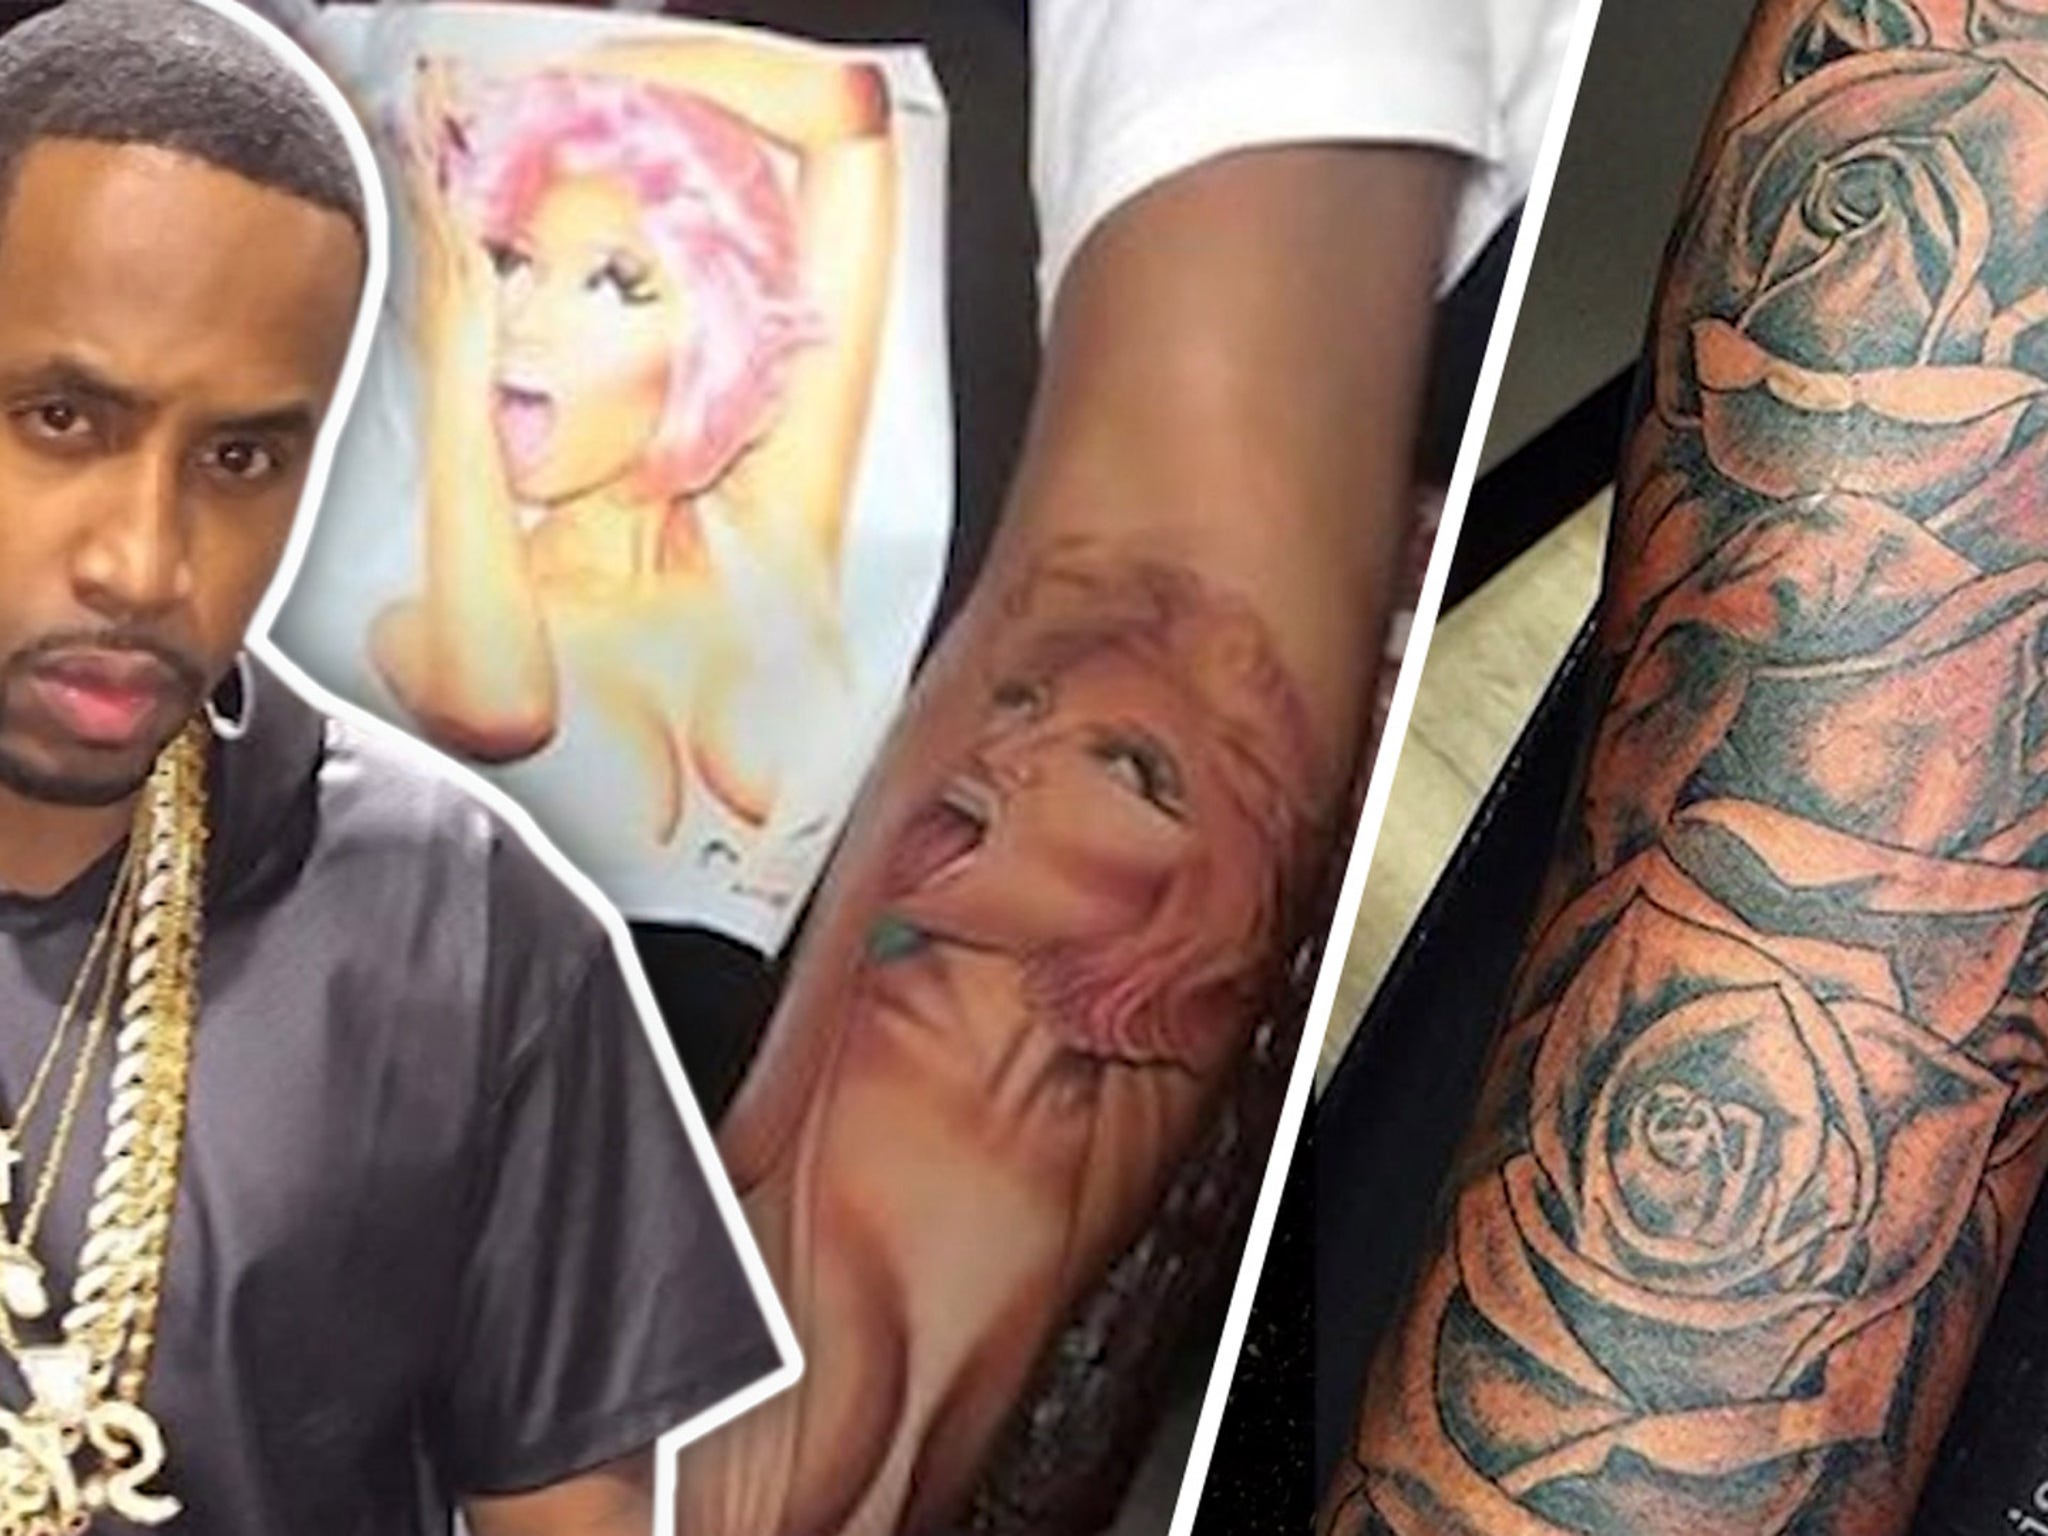 Nicki Minajs boyfriend Safaree Samuels inks over tattoos of her face and  name  Daily Mail Online